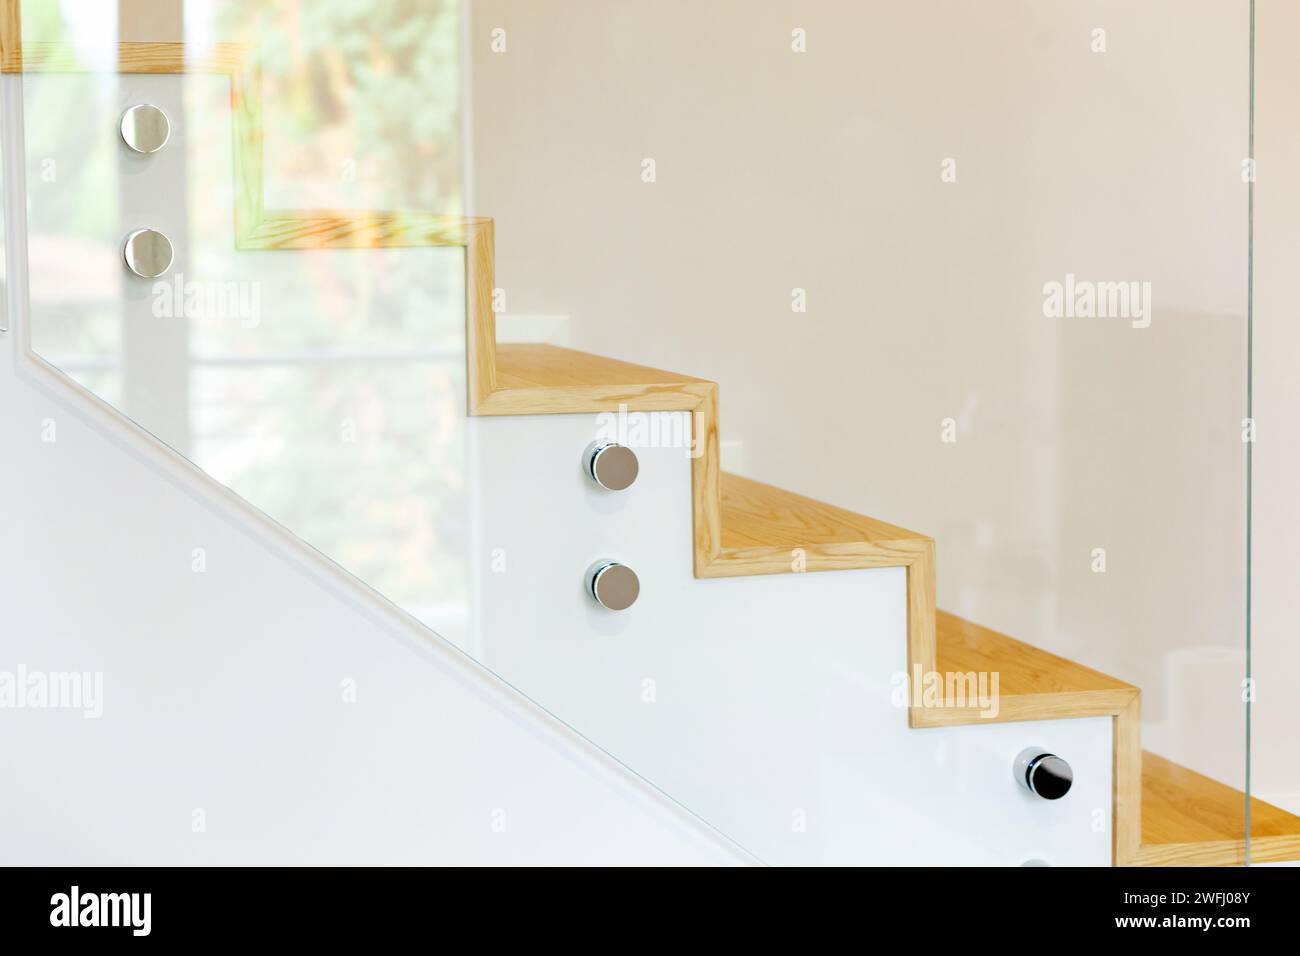 Staircase covered in oak parquet with tempered glass balustrade and chromed pins. Stock Photo